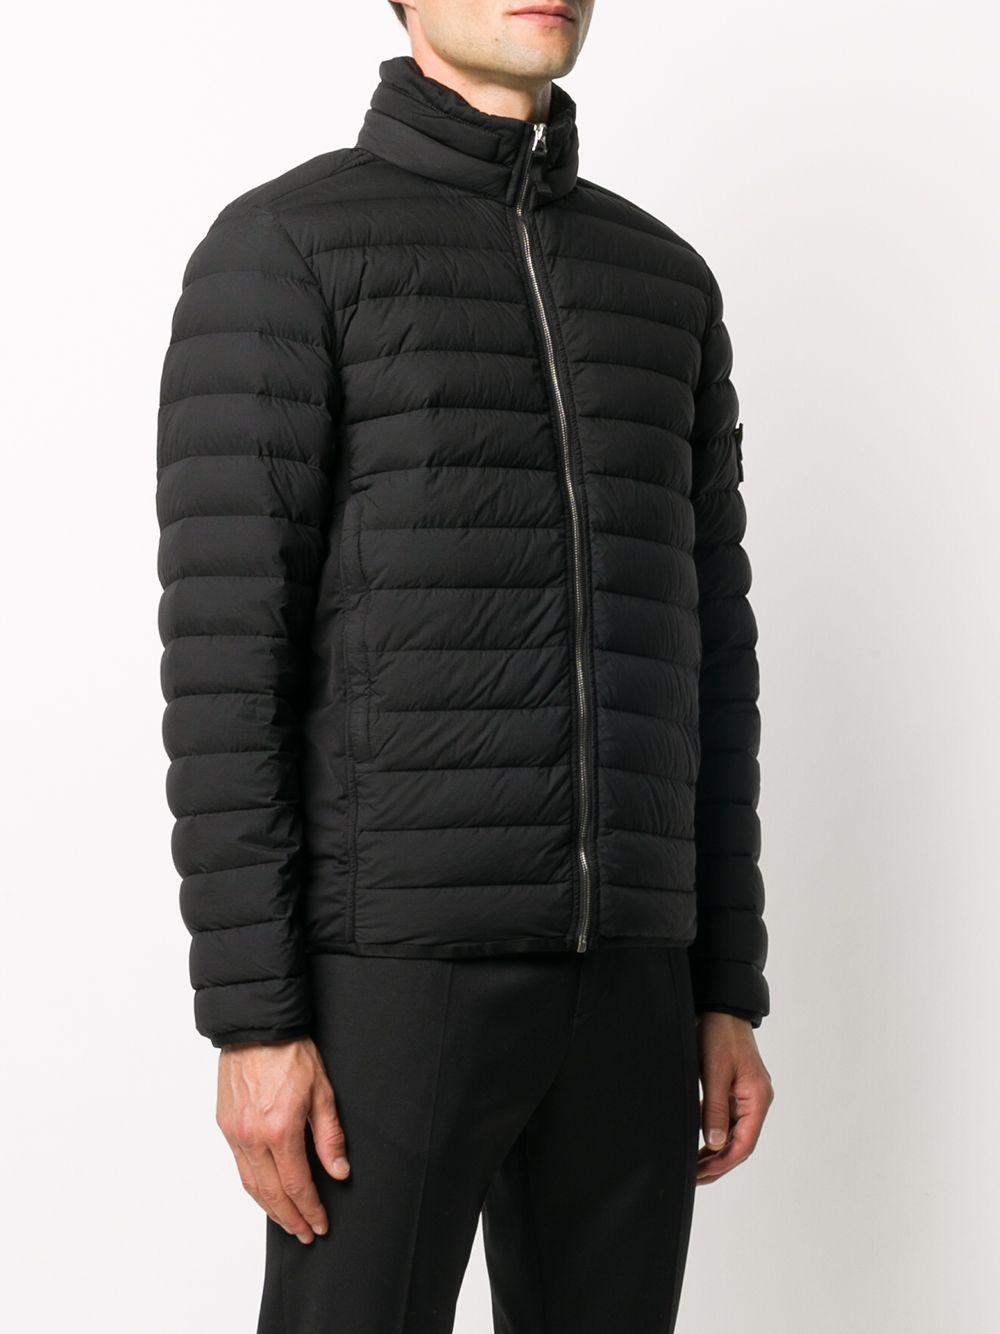 Stone Island Compass Badge Puffer Jacket in Black for Men - Lyst